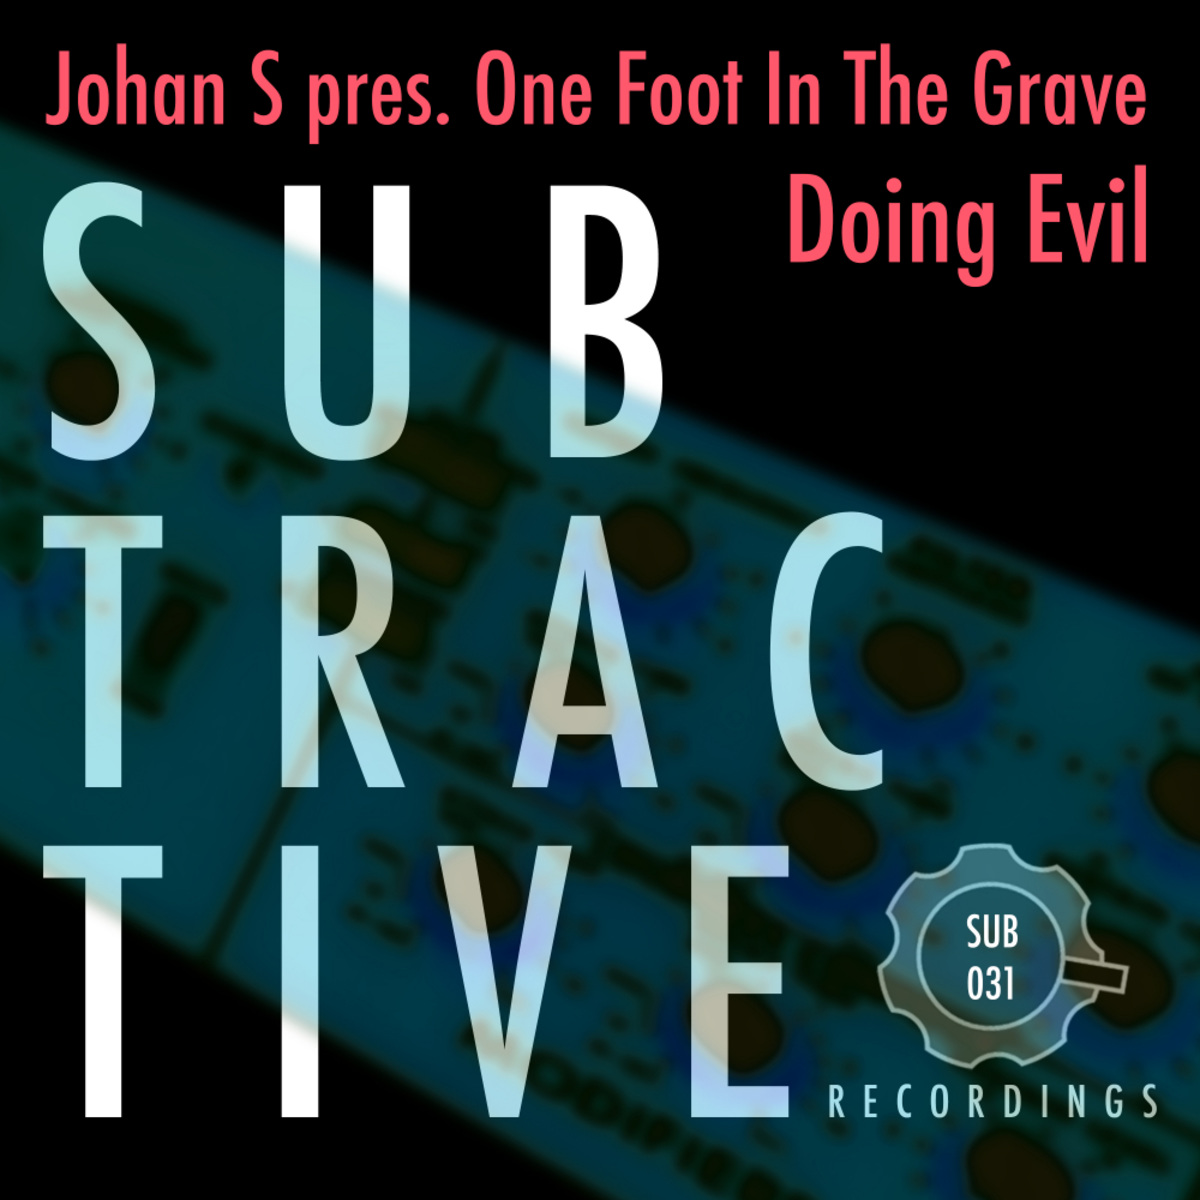 Johan S pres. One Foot in the Grave - Doing Evil / Subtractive Recordings